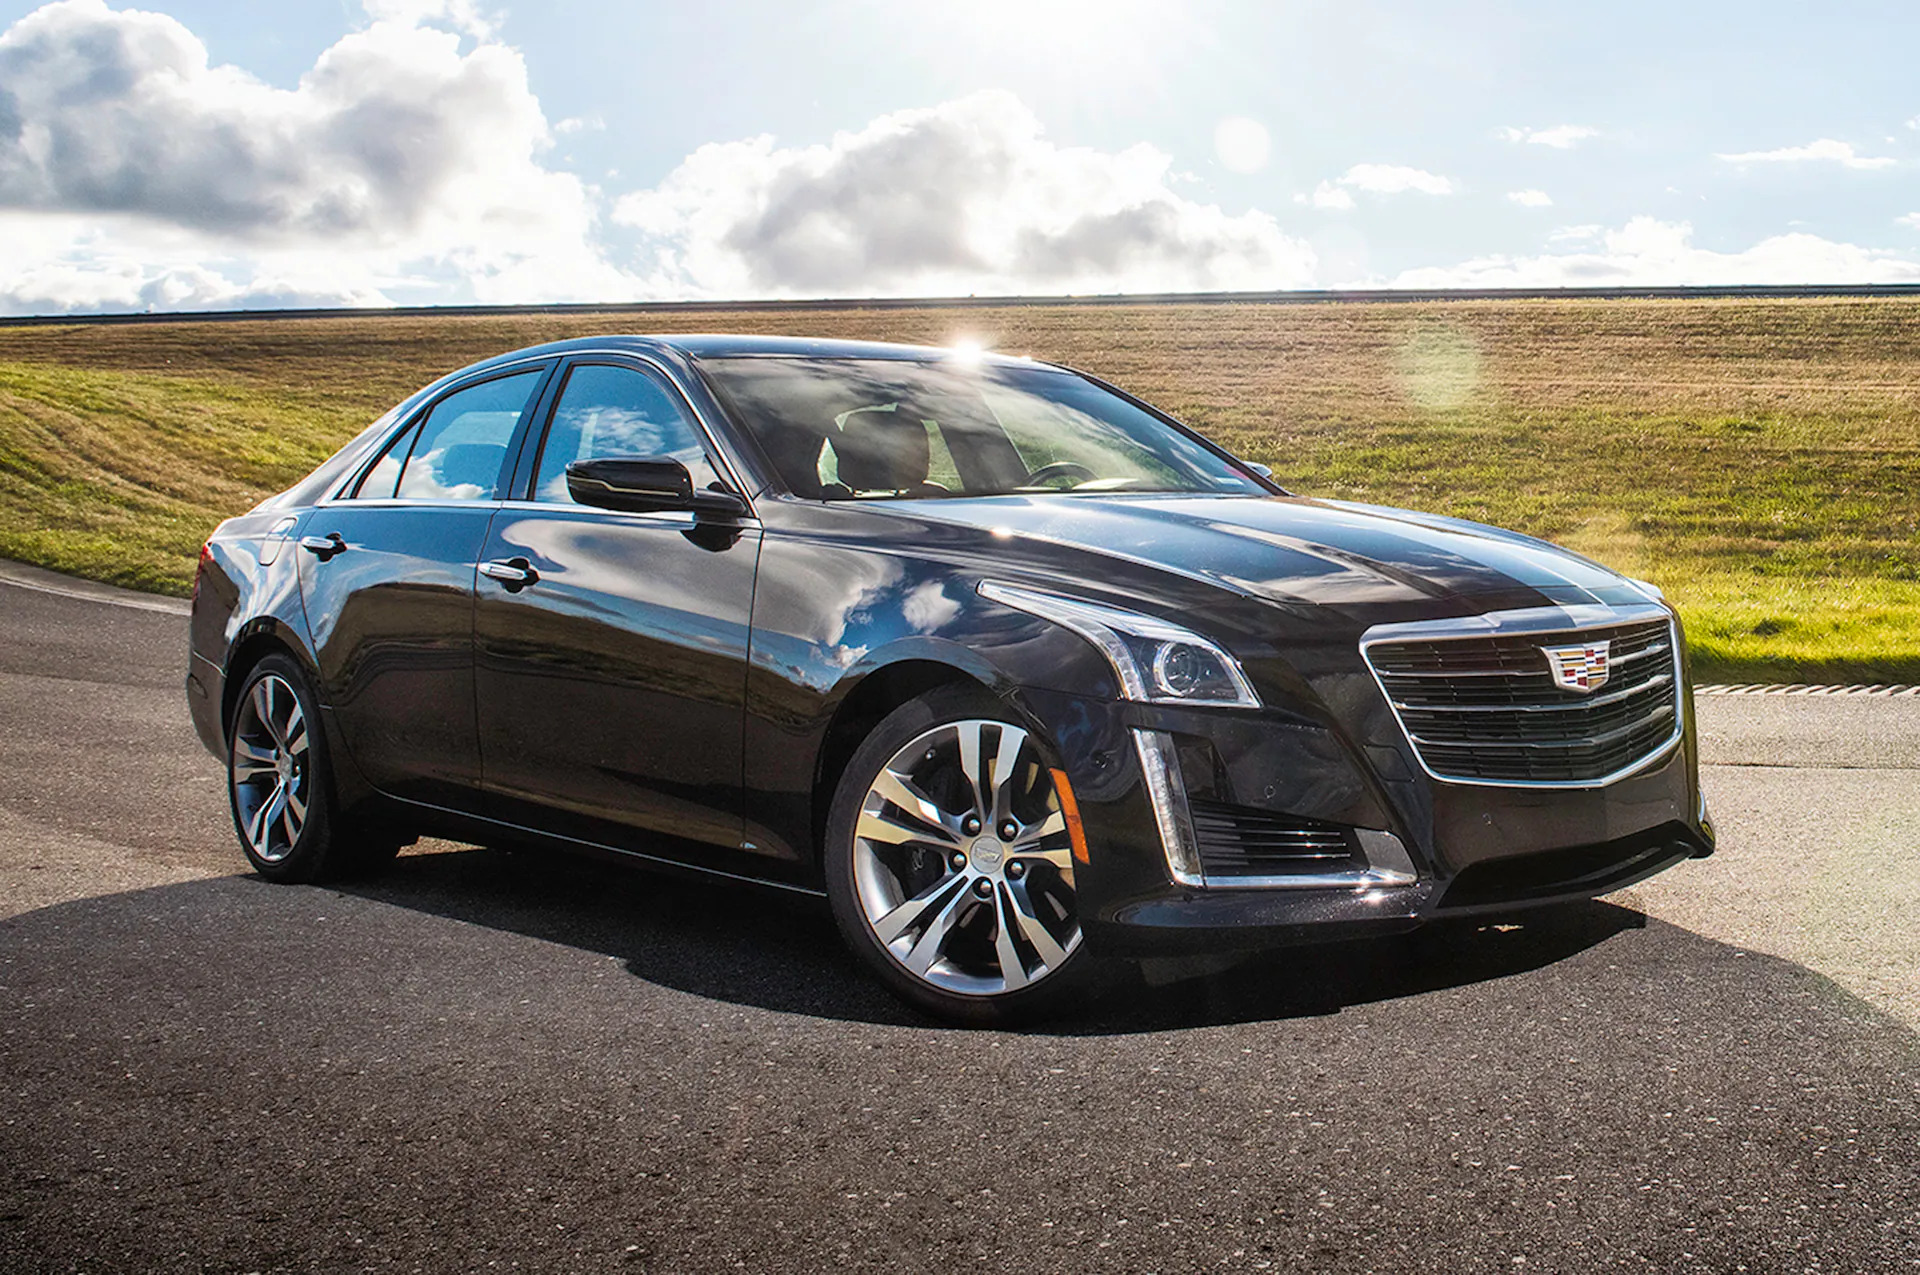 Used Cadillac CTS Buying Guide